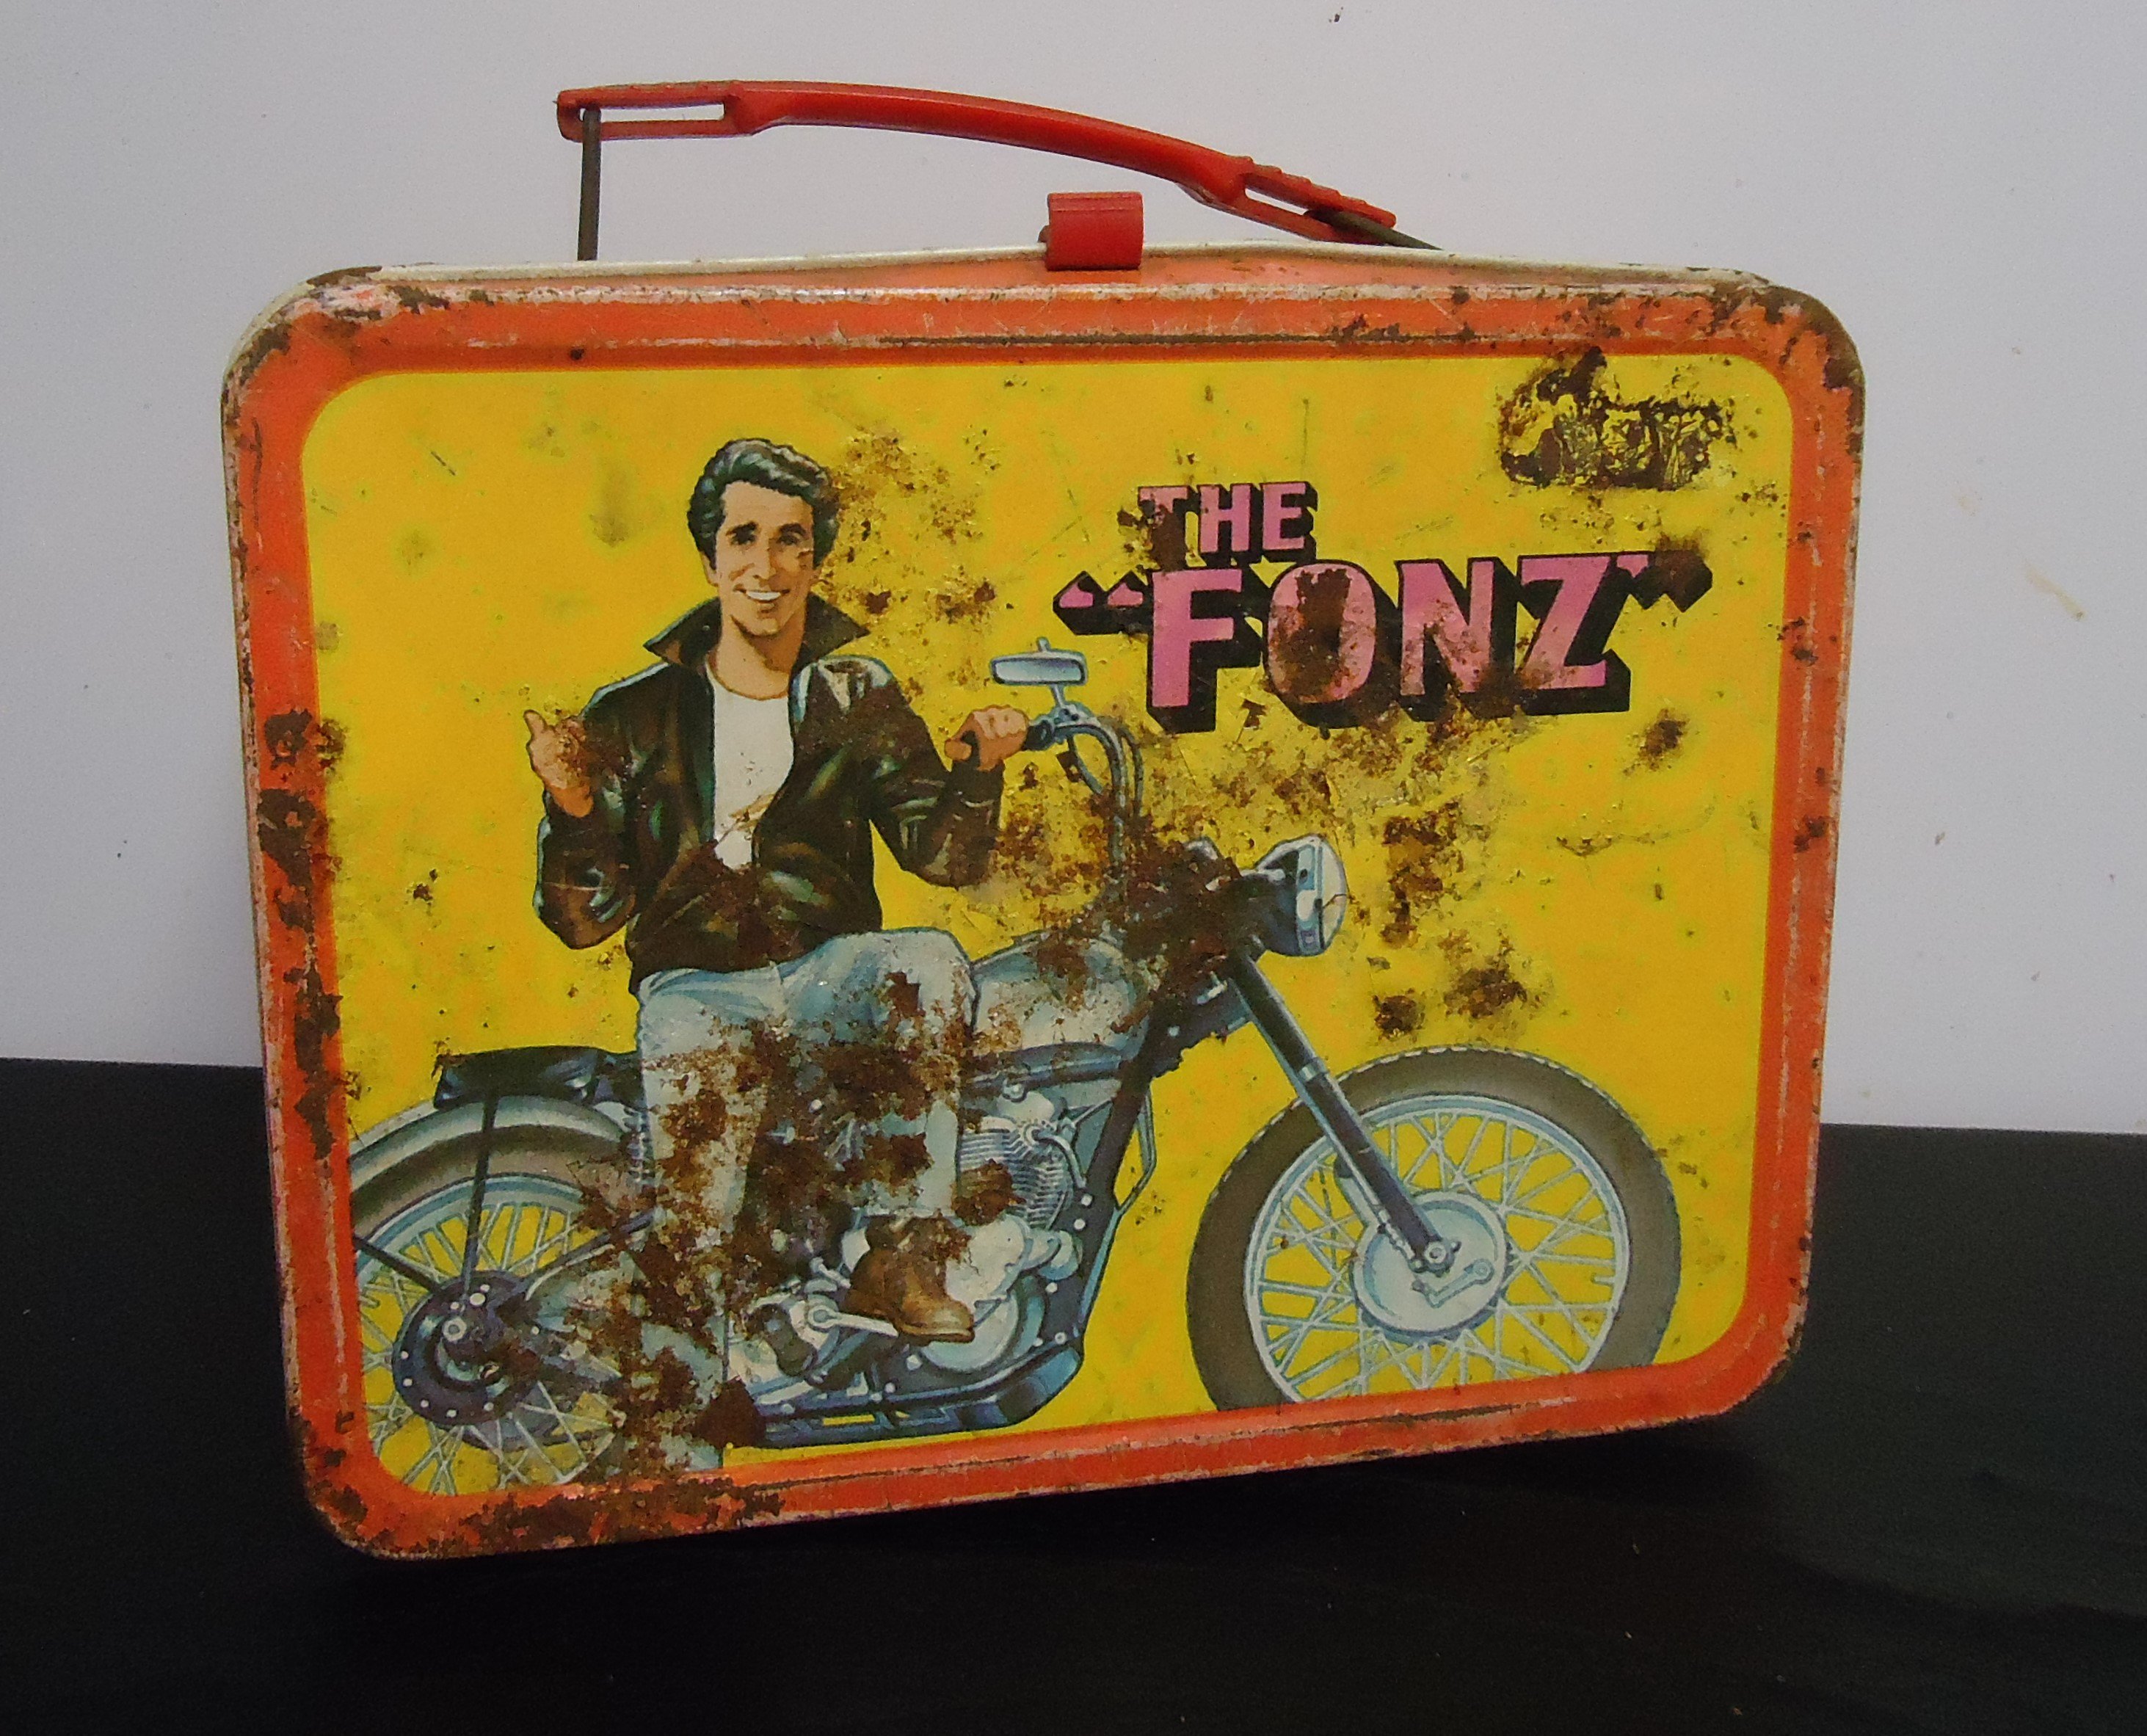 (9) "Happy Days" (The Fonz)
Metal Lunch Box W/Out Thermos
$38.00